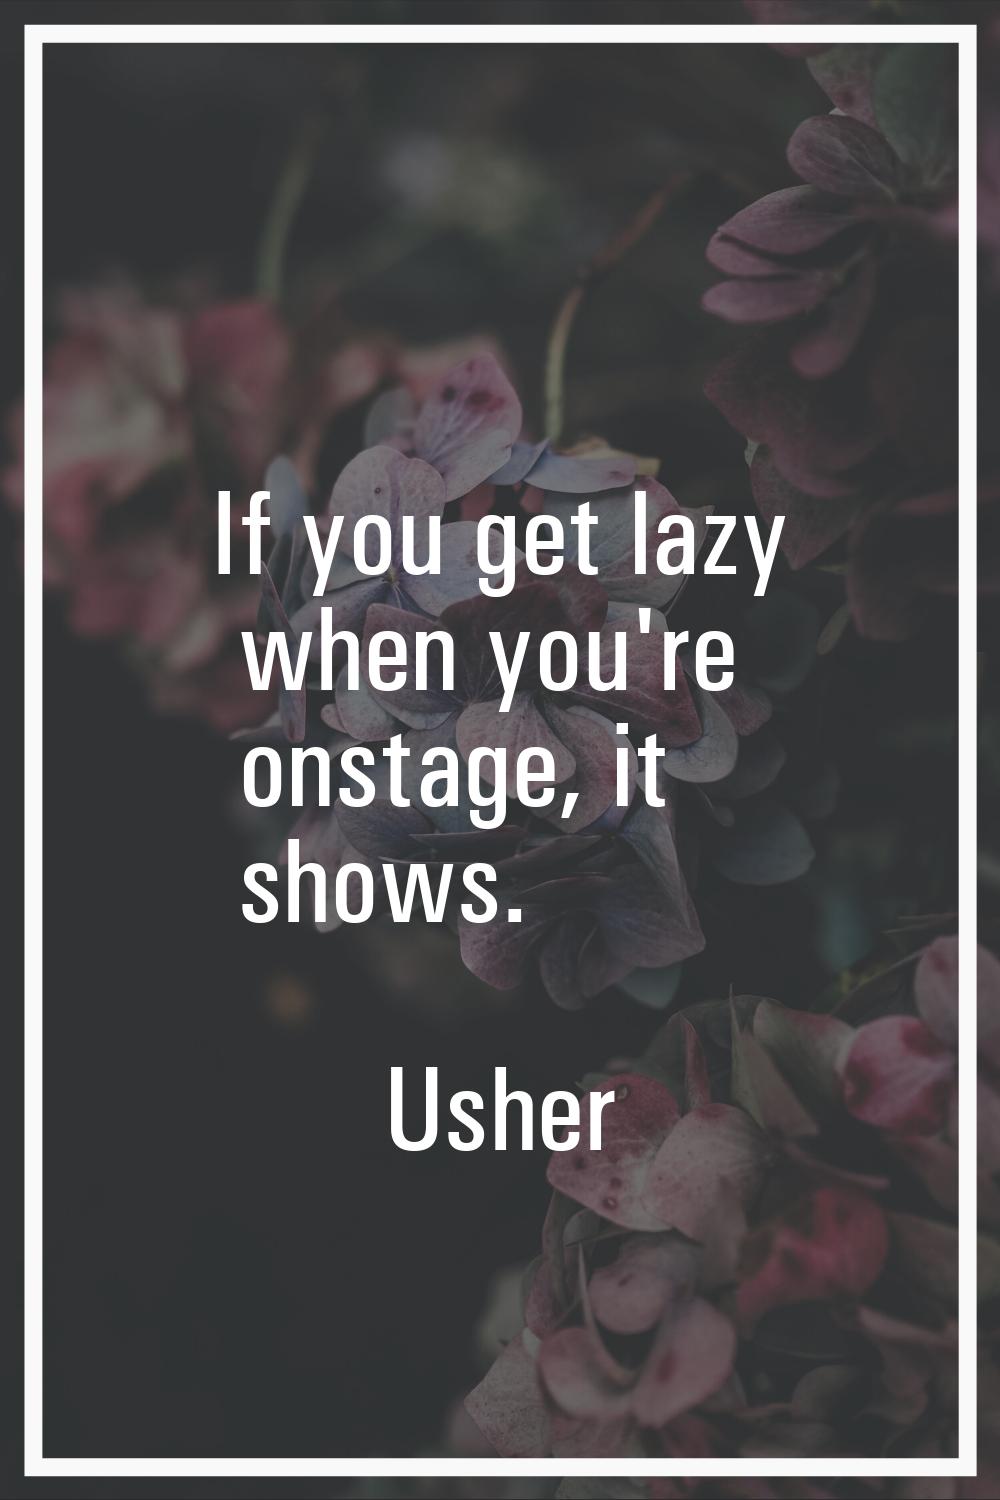 If you get lazy when you're onstage, it shows.